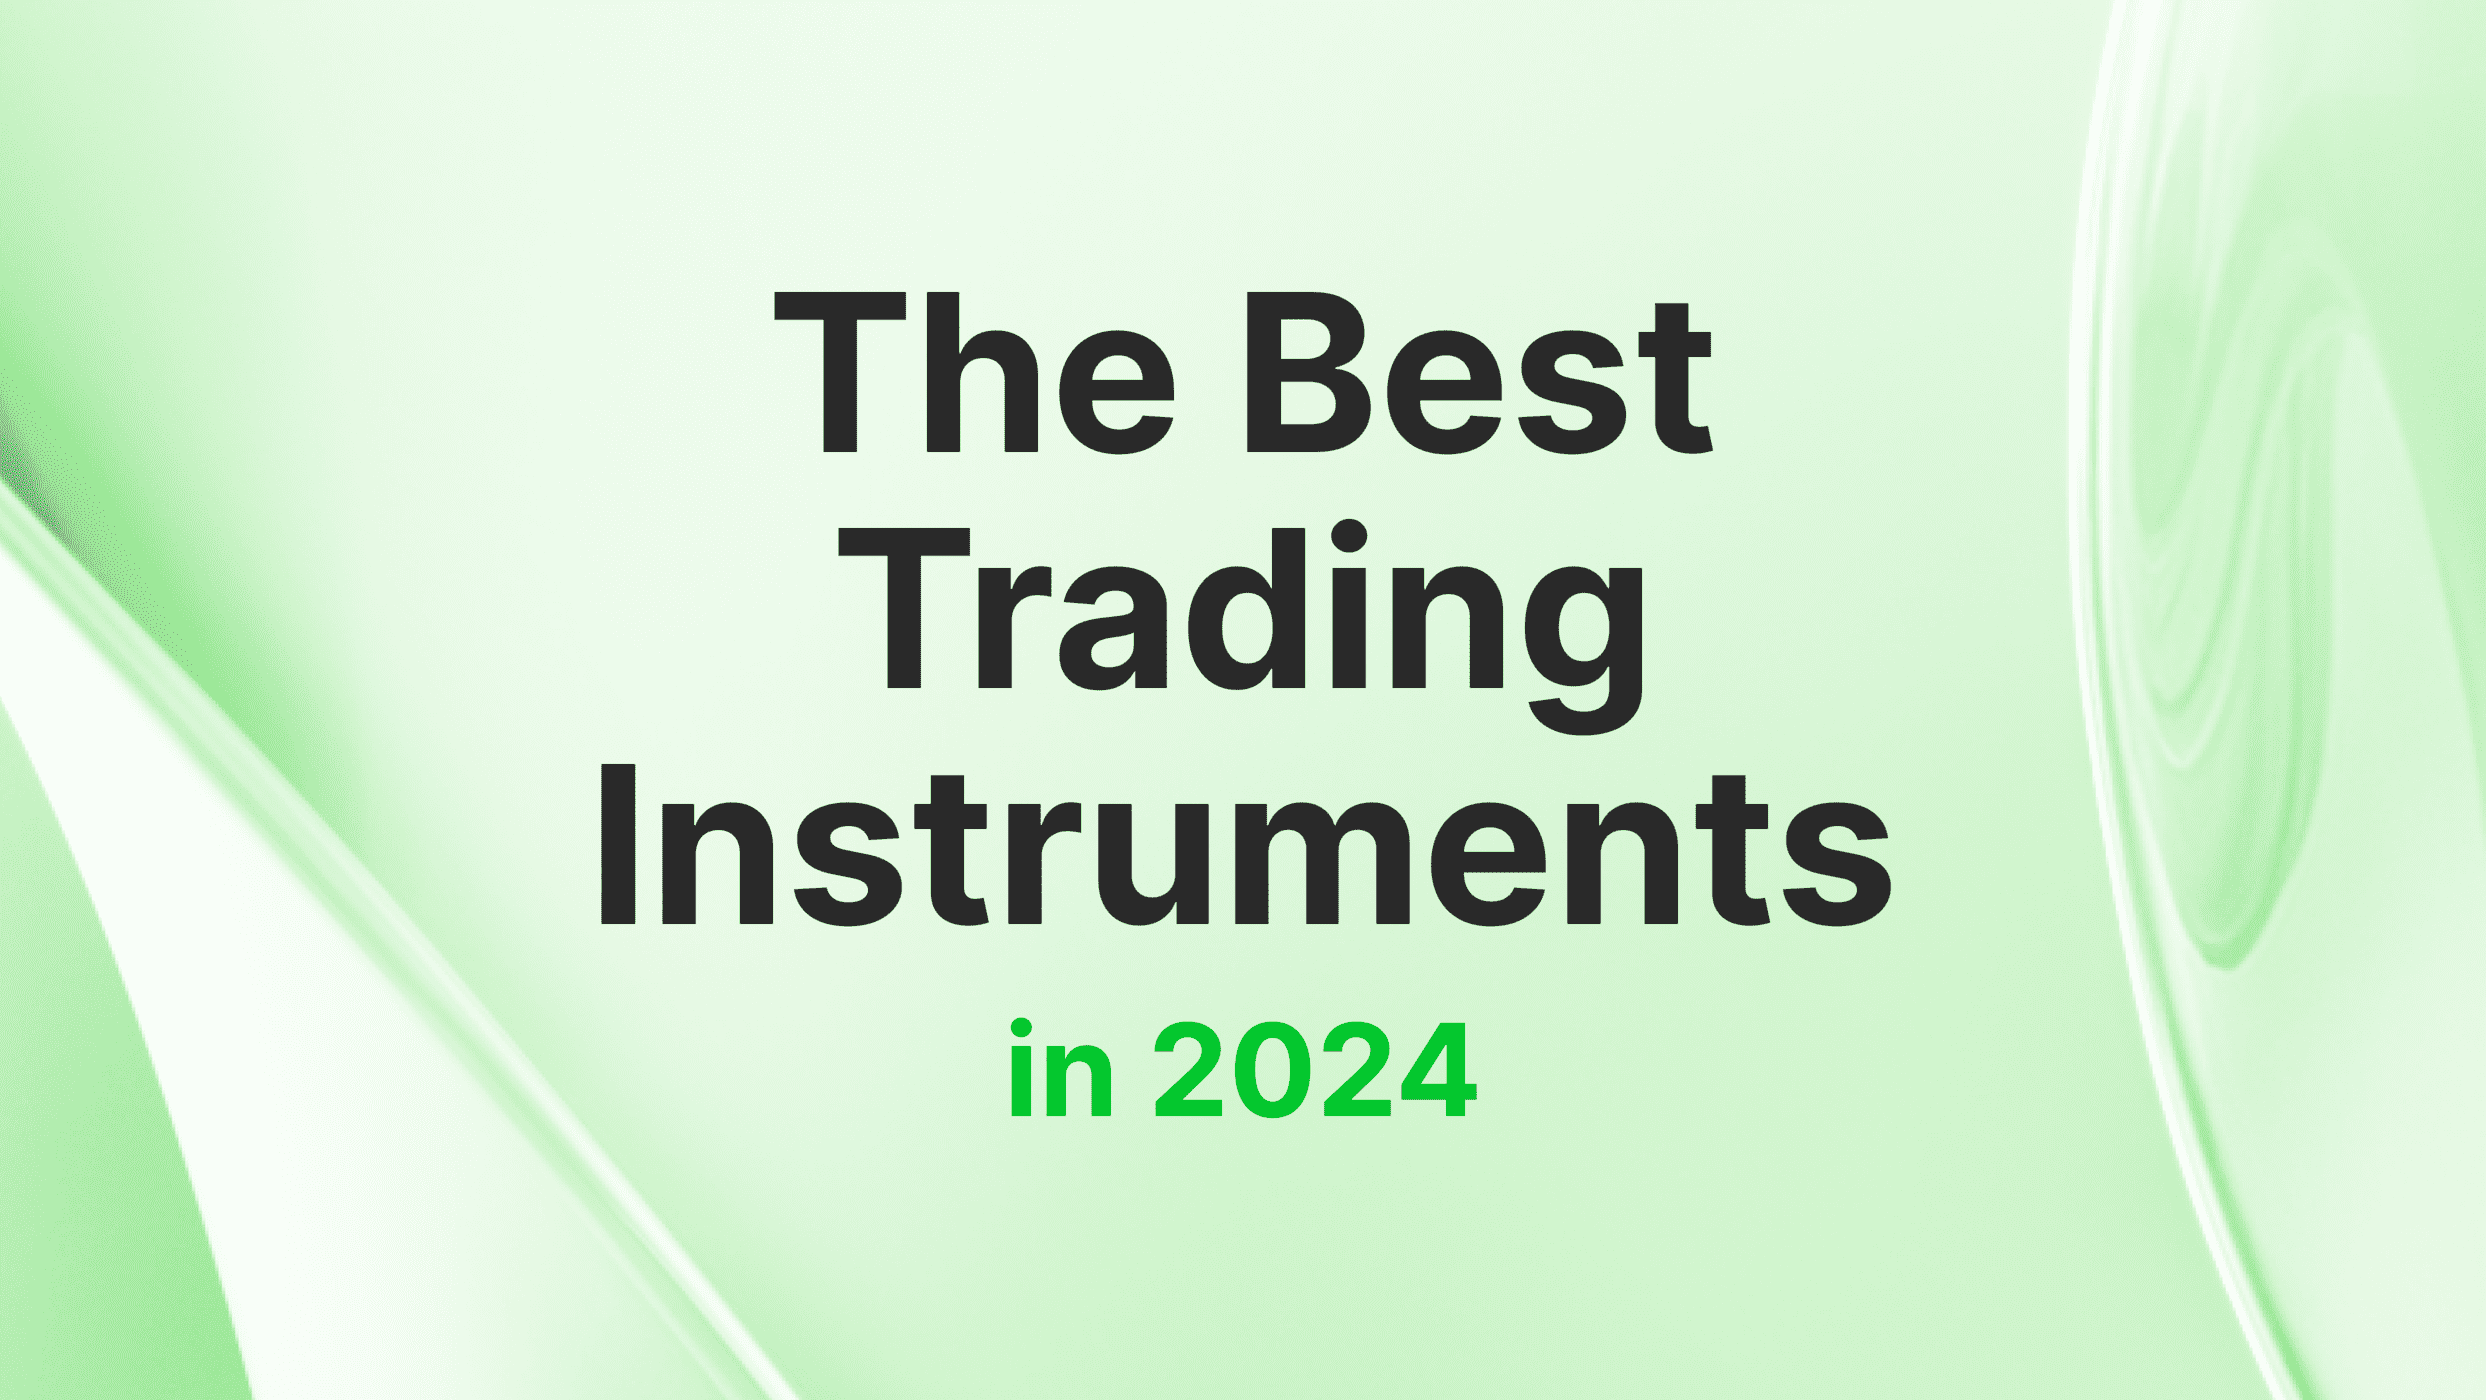 The Most Popular Trading Instruments in 2024